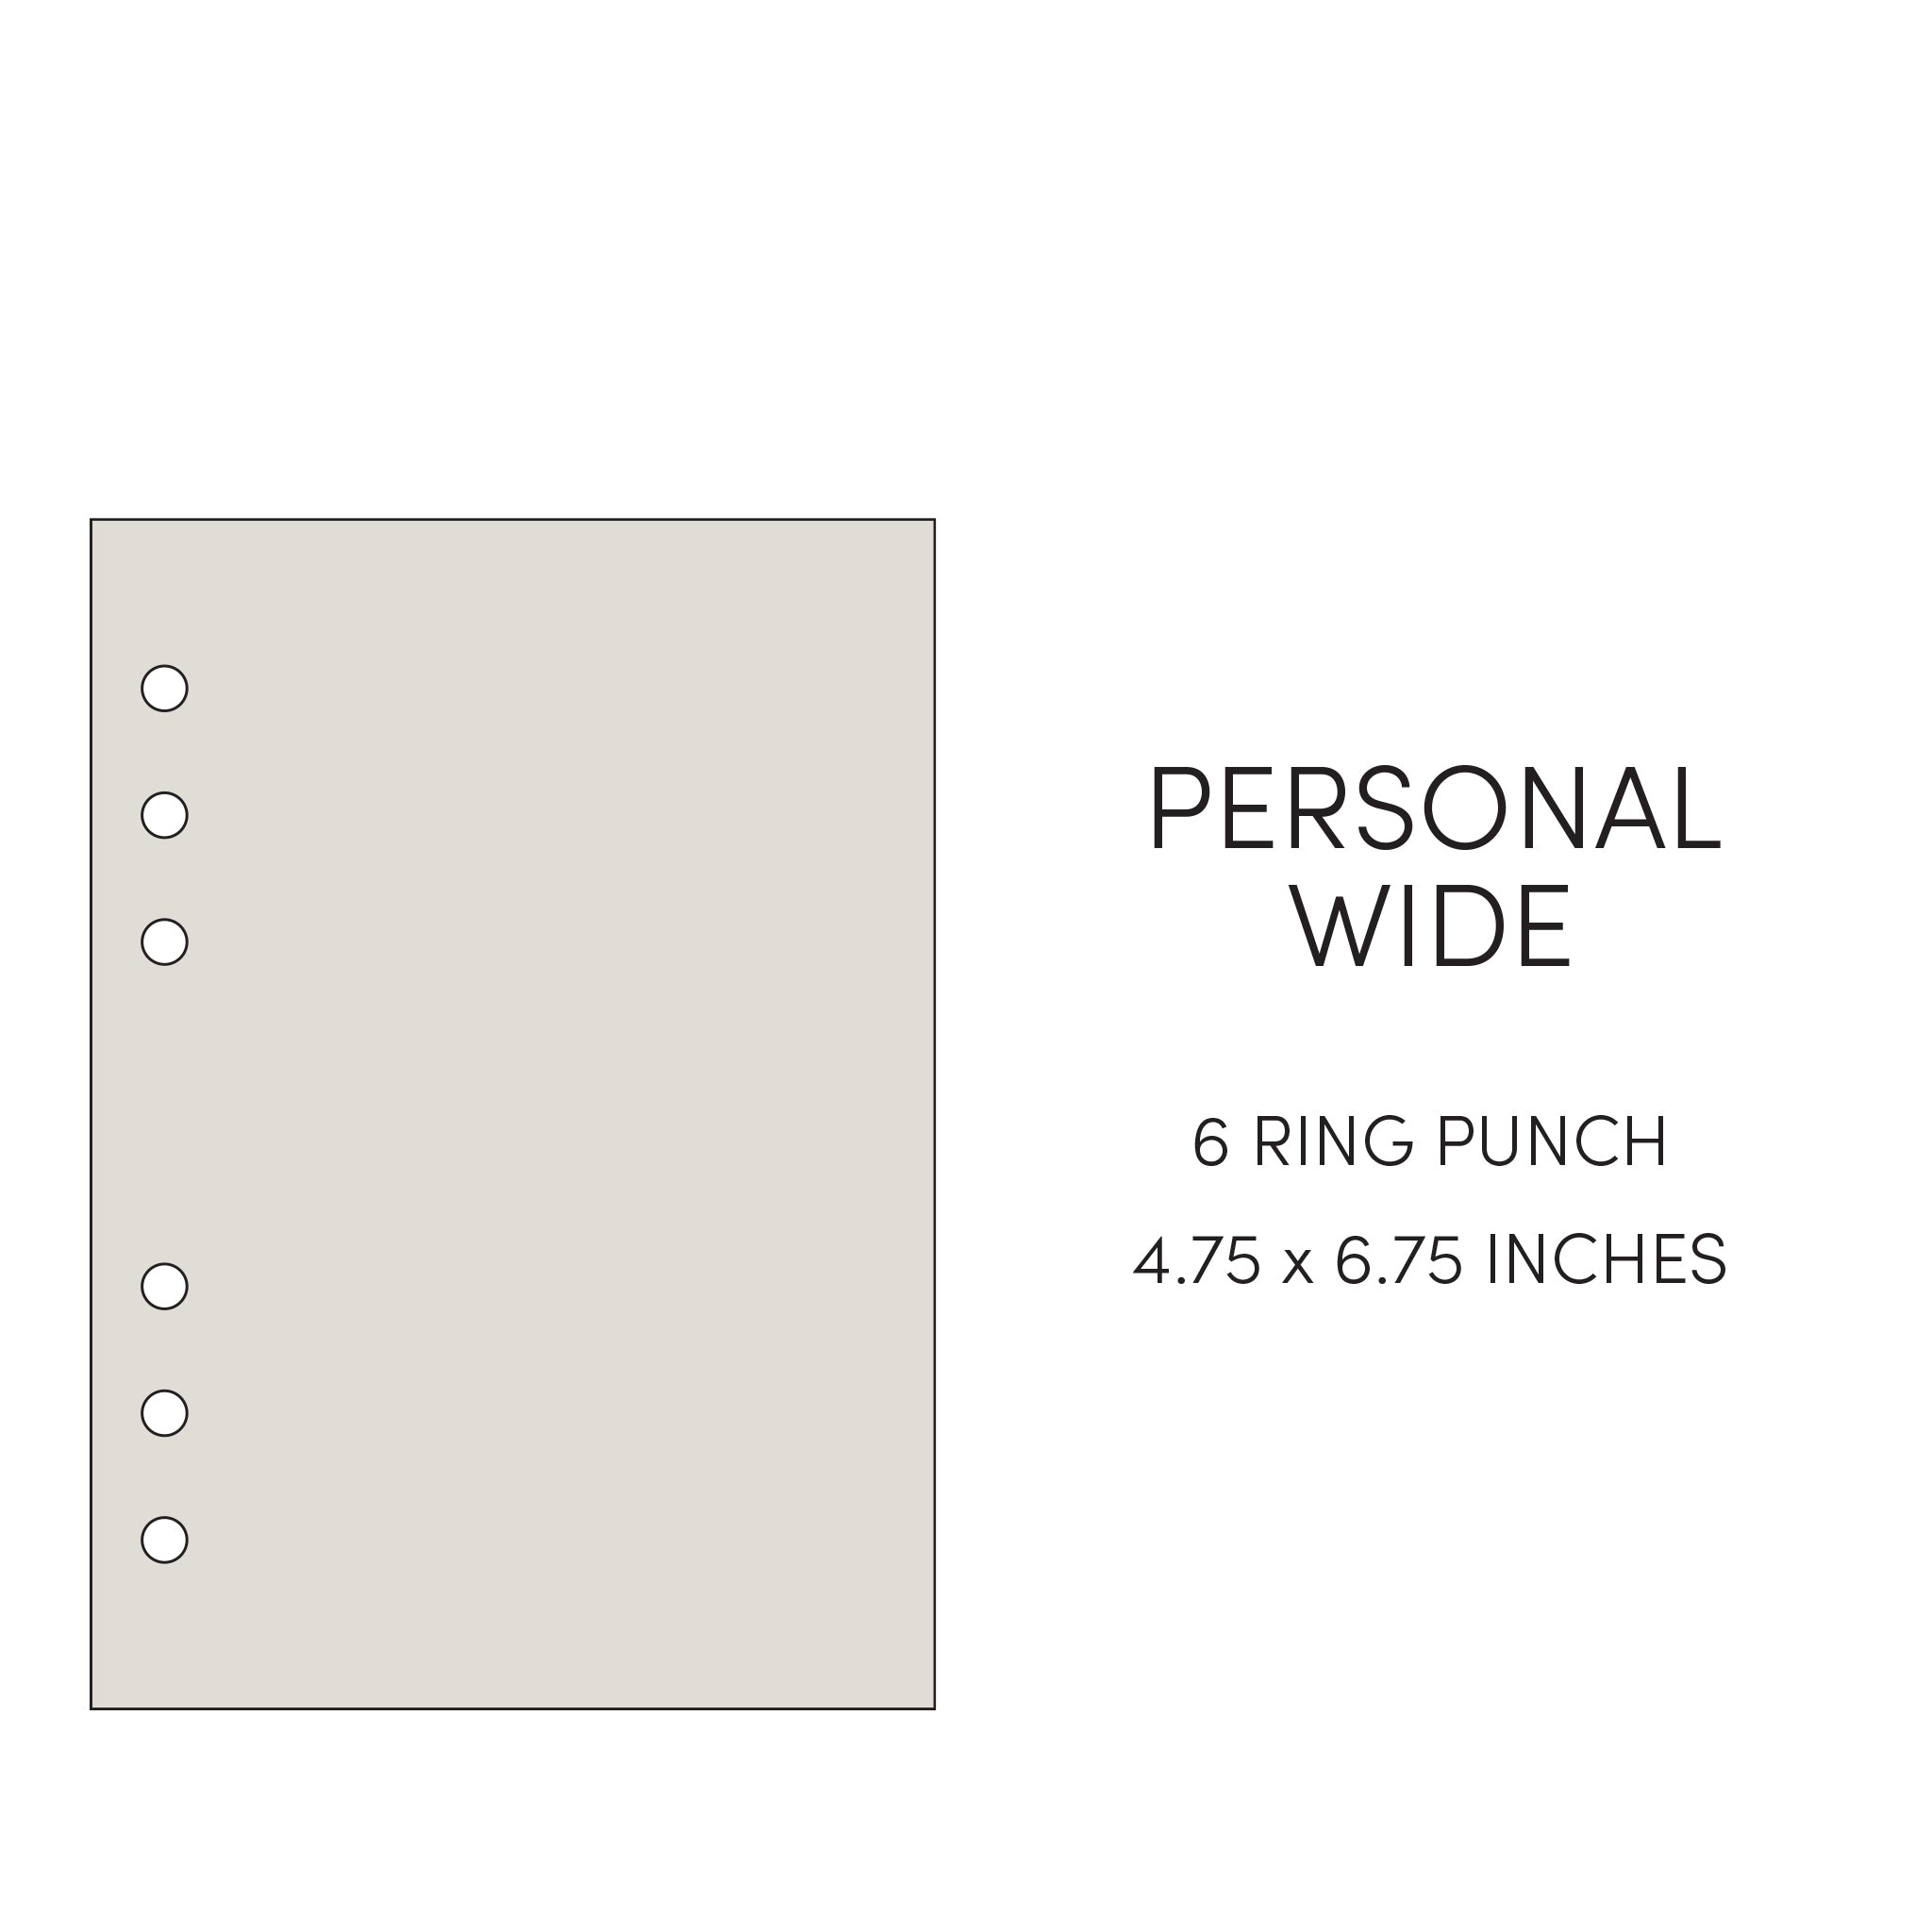 Cloth and Paper size guide - Personal Wide - 4.75 x 6.75 inches